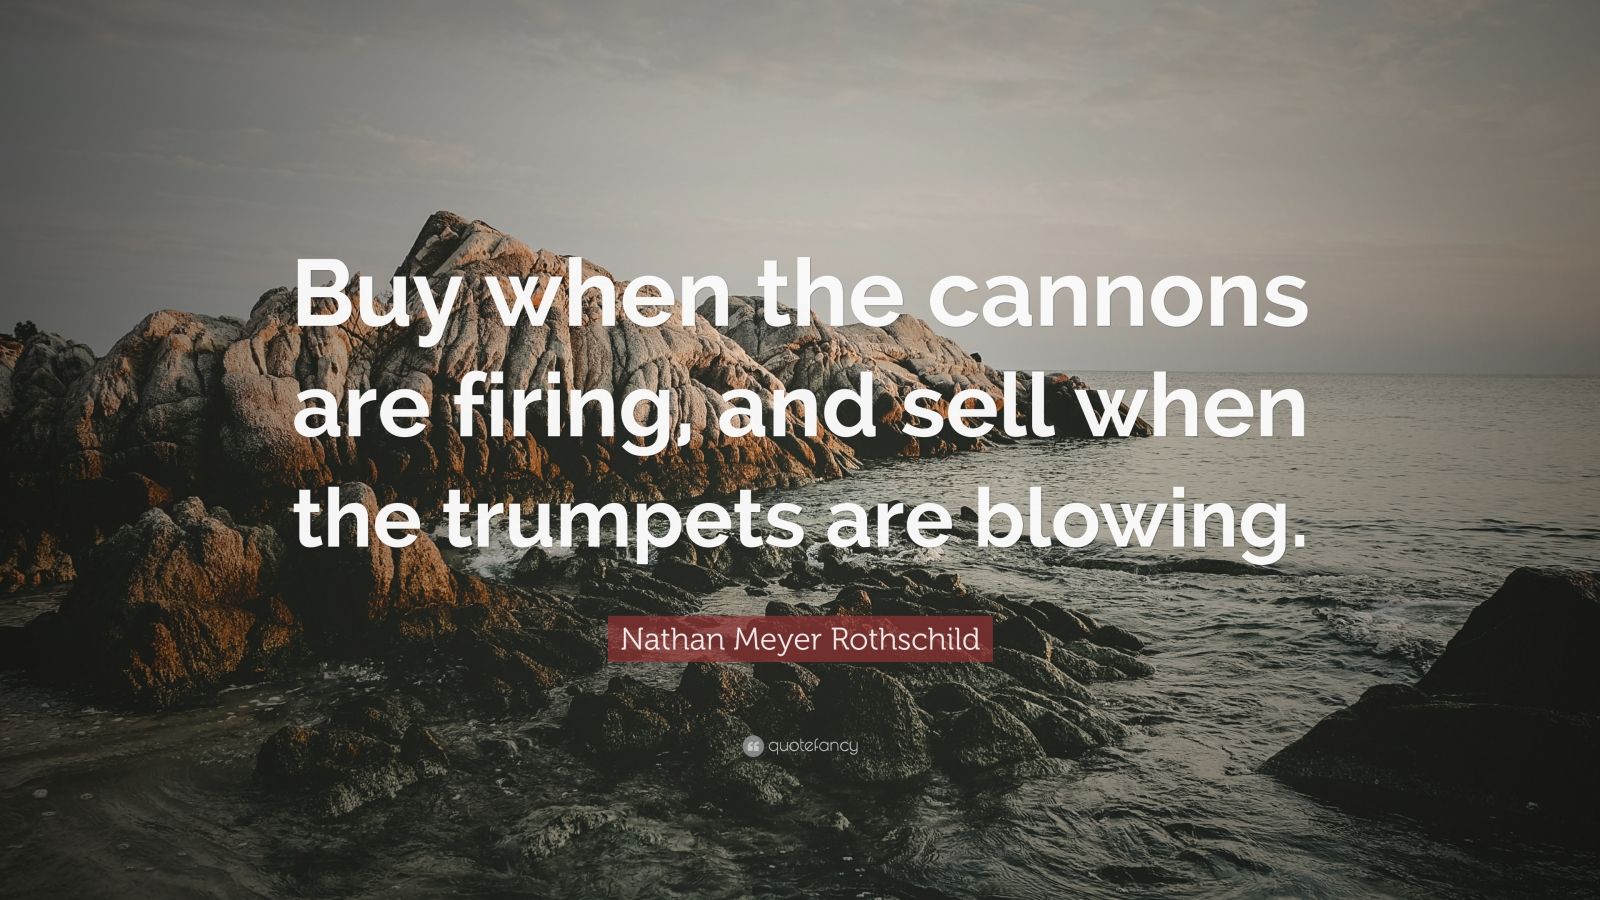 Nathan Meyer Rothschild Quote: “Buy when the cannons are firing, and